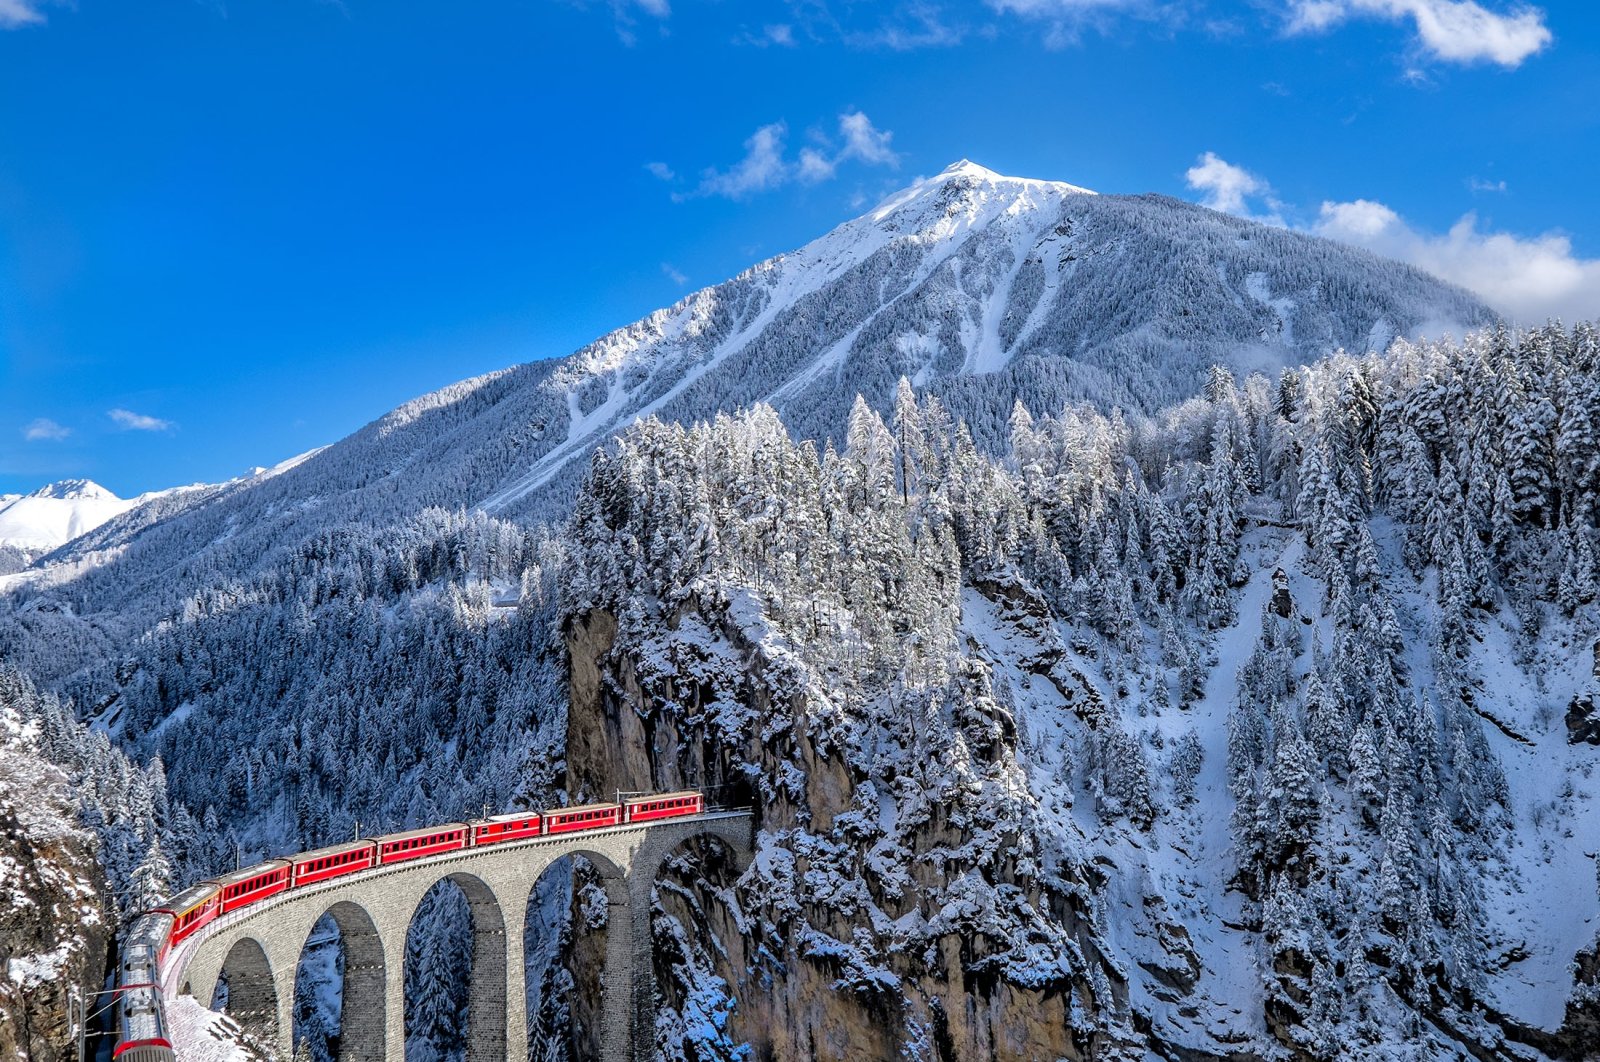 The Glacier Express is an express train in the central Swiss Alps that connects the two major mountain resorts of Zermatt and St. Moritz in Switzerland. (Shutterstock Photo)